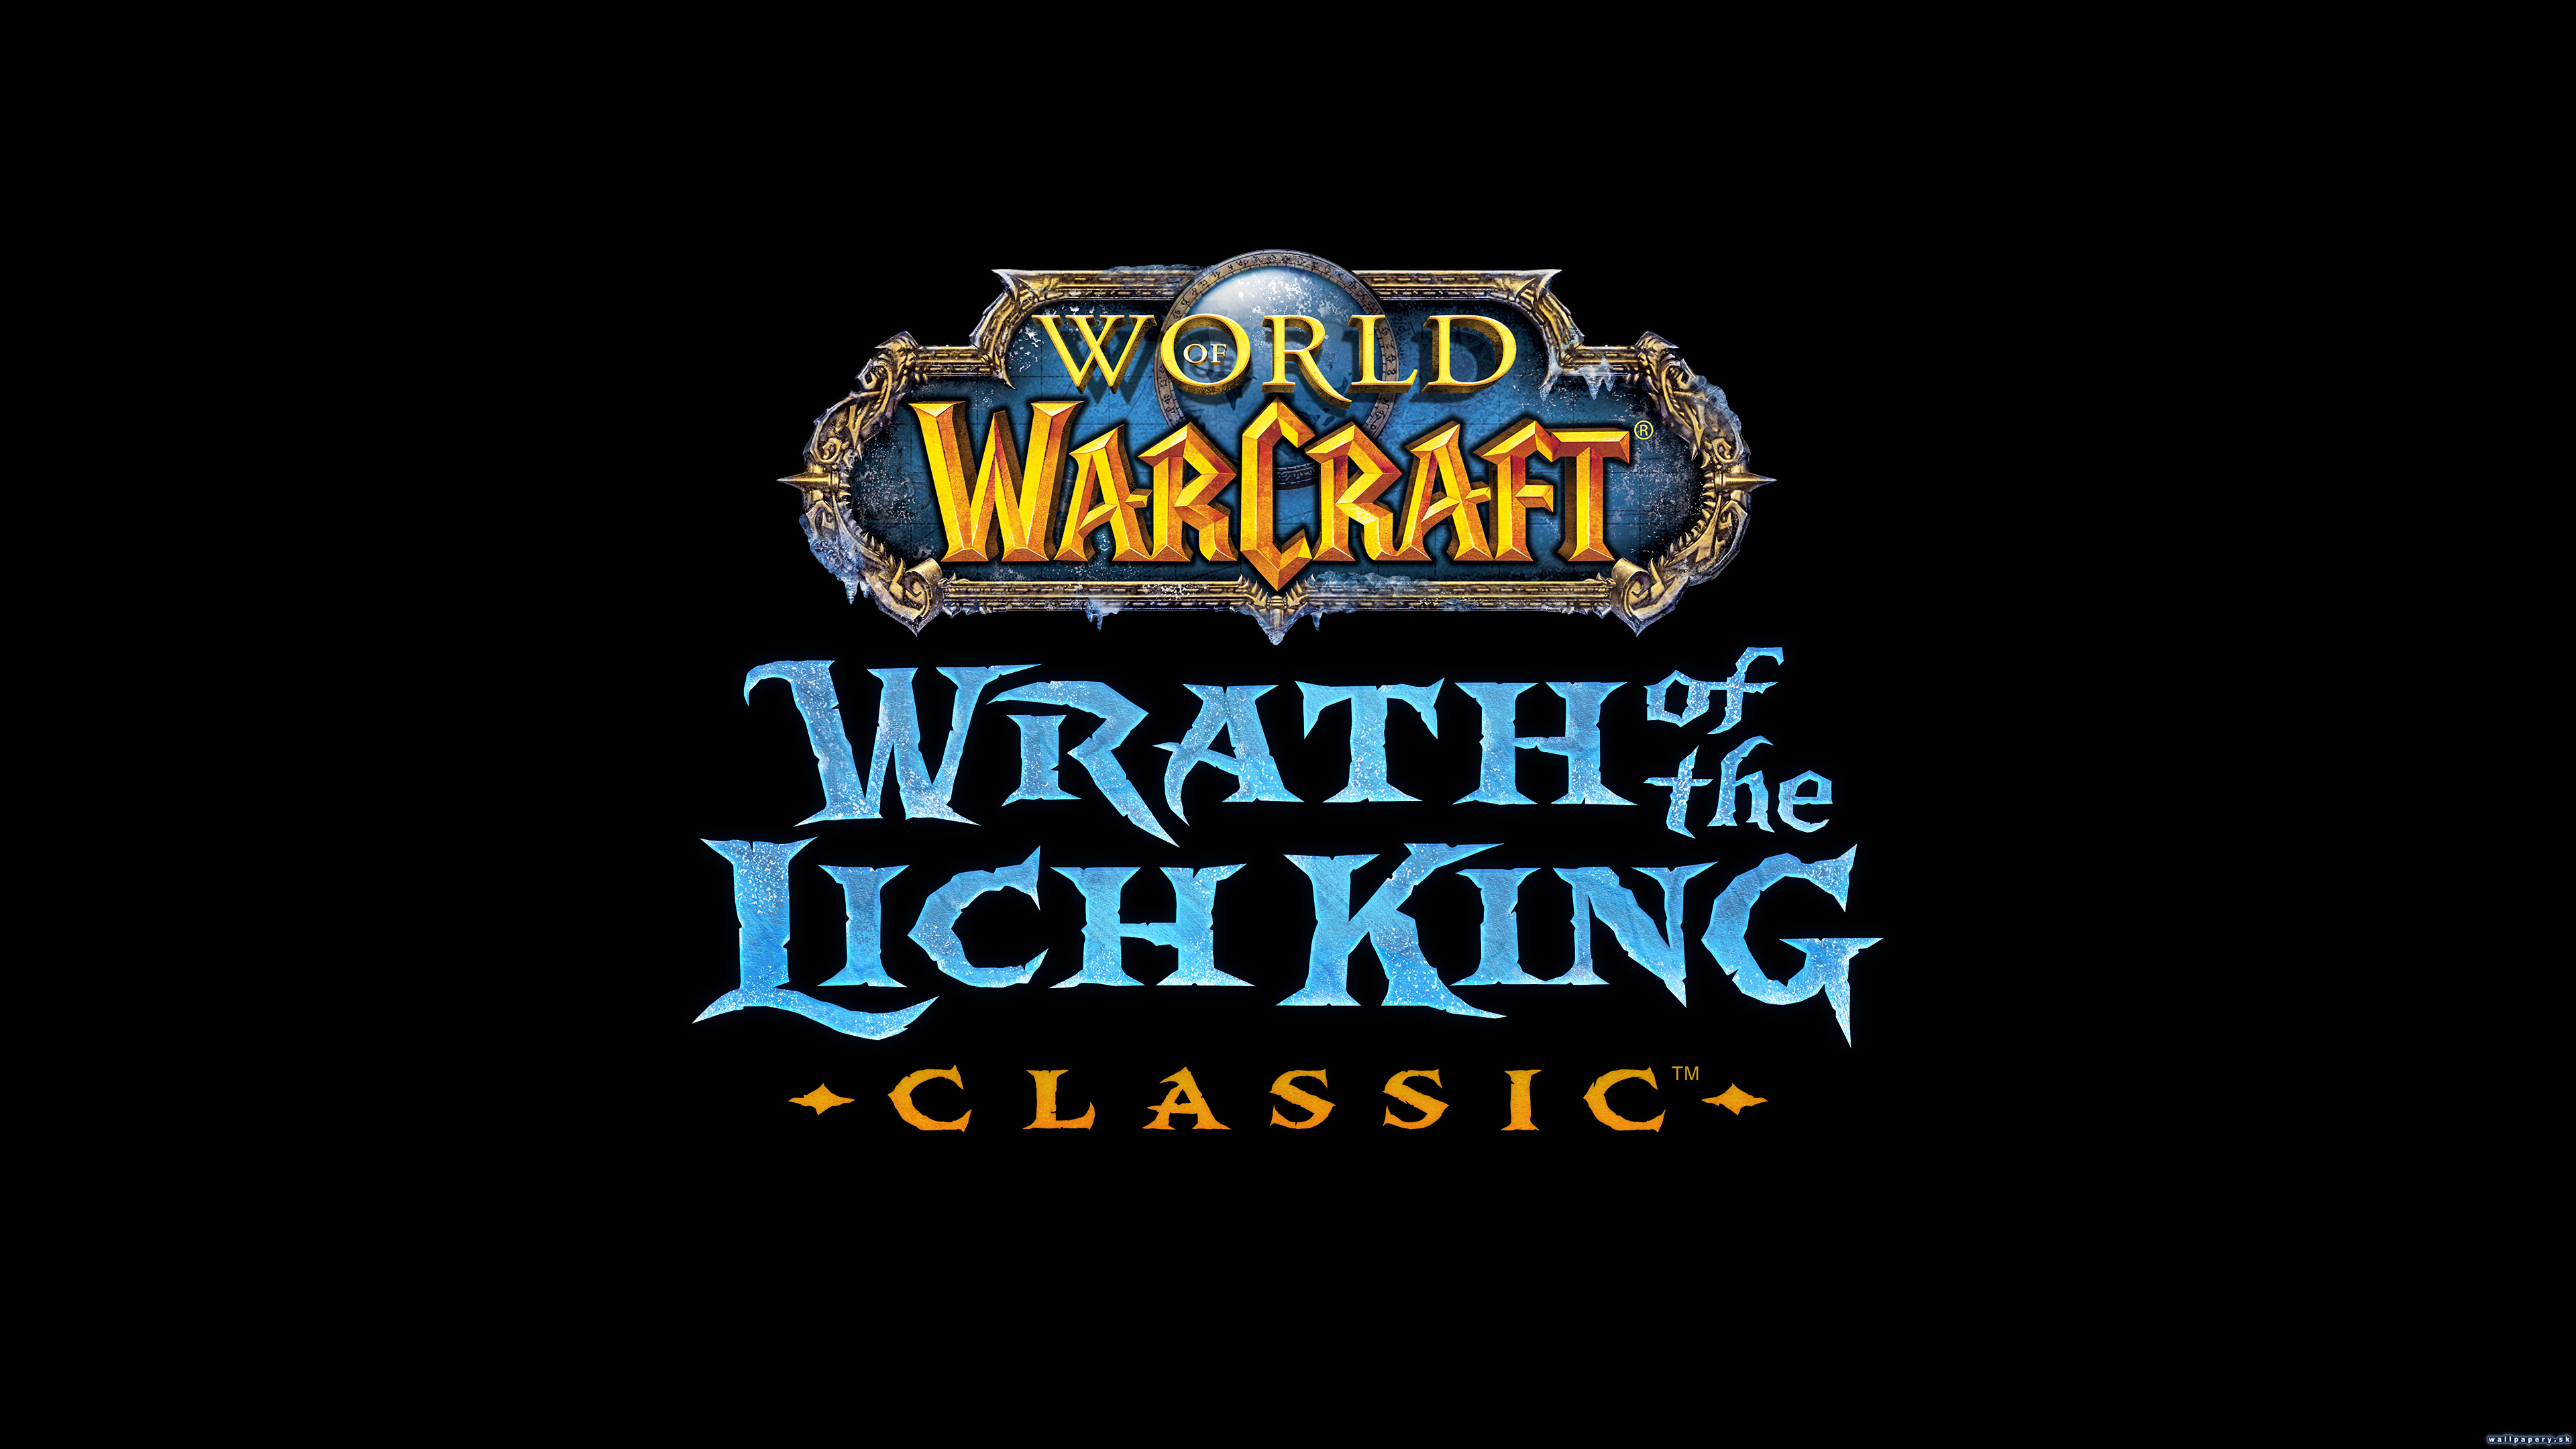 World of Warcraft: Wrath of the Lich King Classic - wallpaper 2